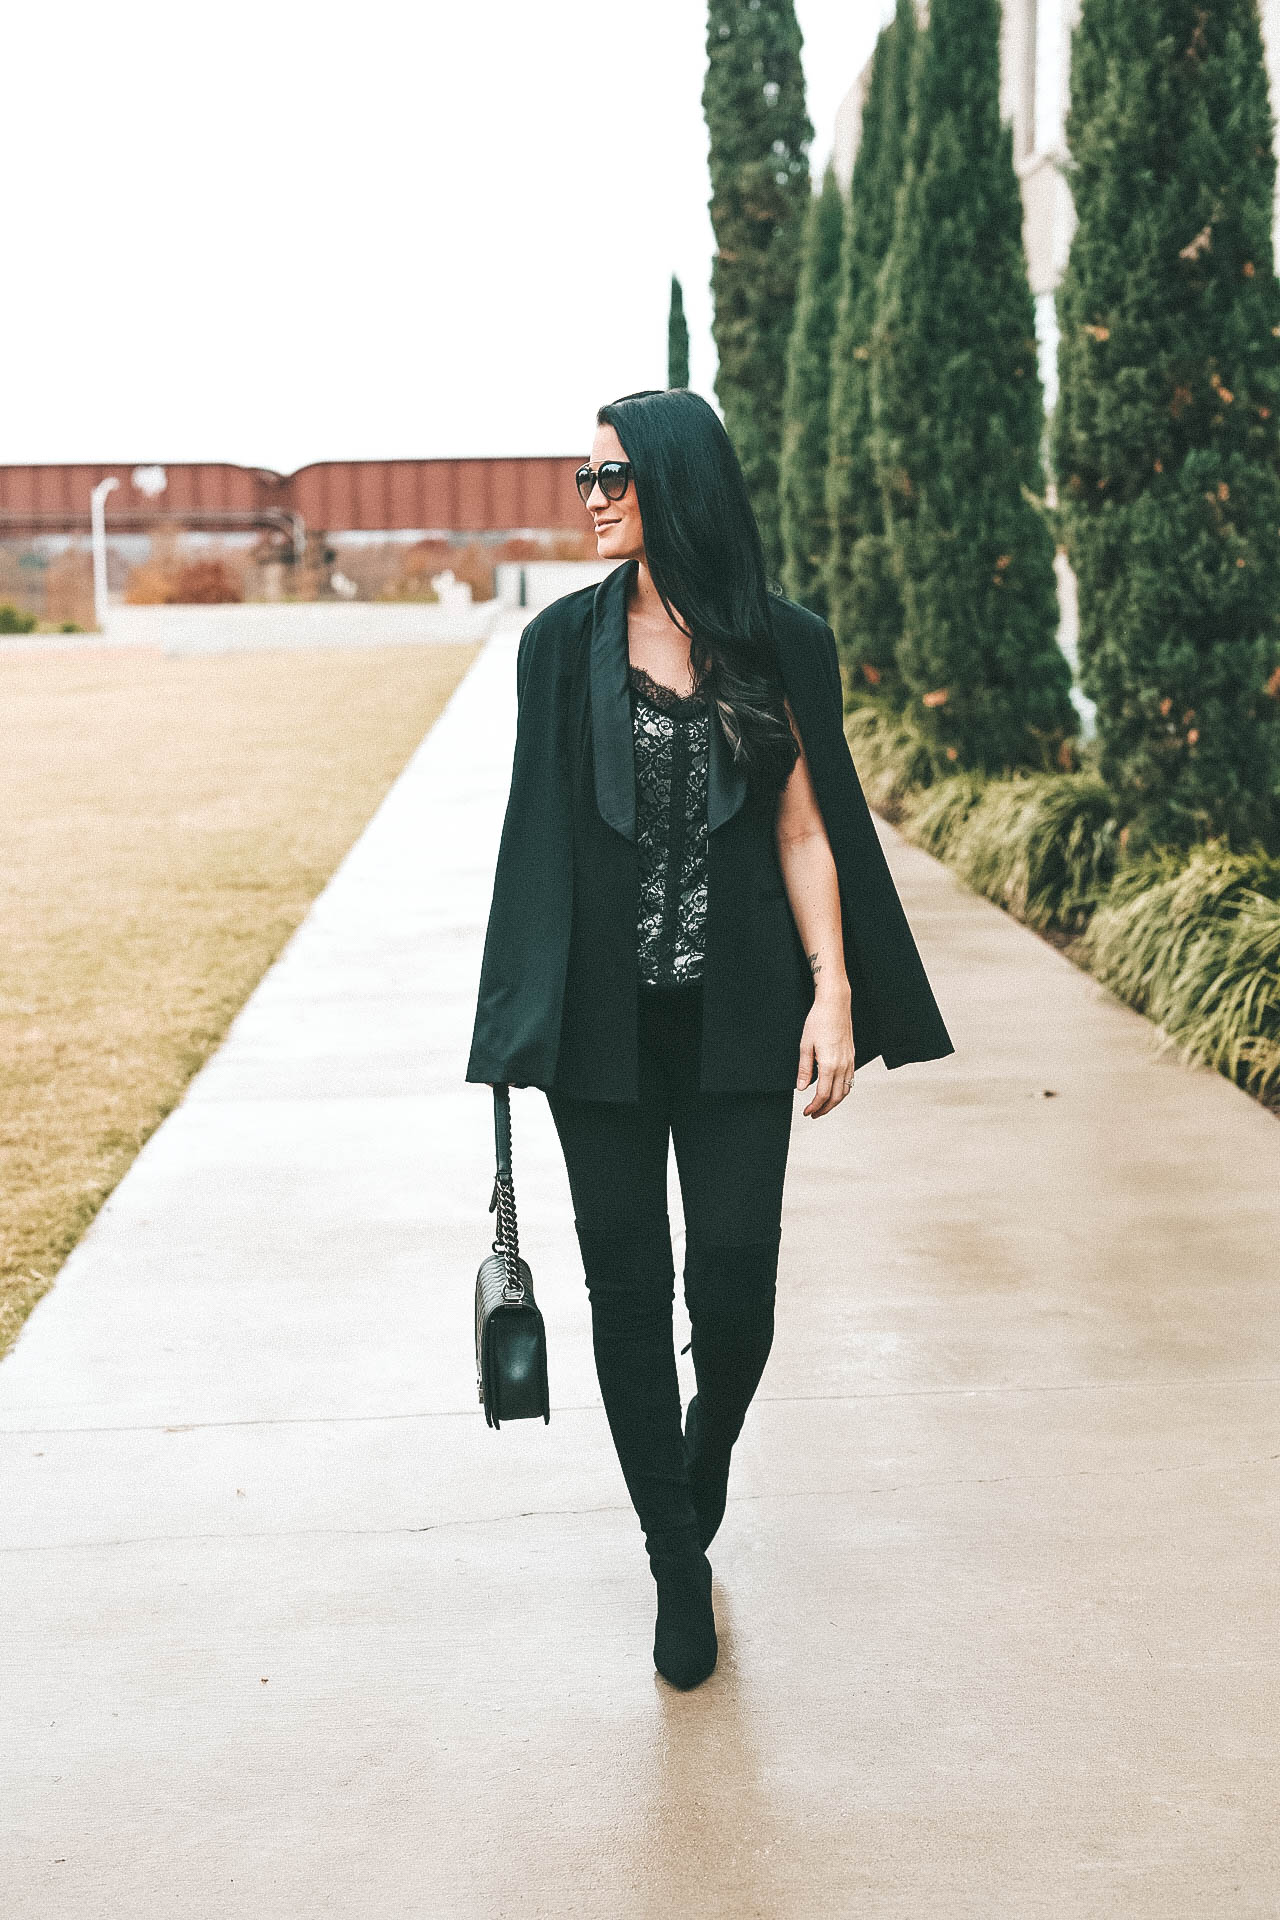 Black tuxedo cape and lace cami || Dressed to Kill #tuxedocape #camisole #lacecami - Shelli Segal Removable Tuxedo Cap by popular Austin style blogger Dressed to Kill